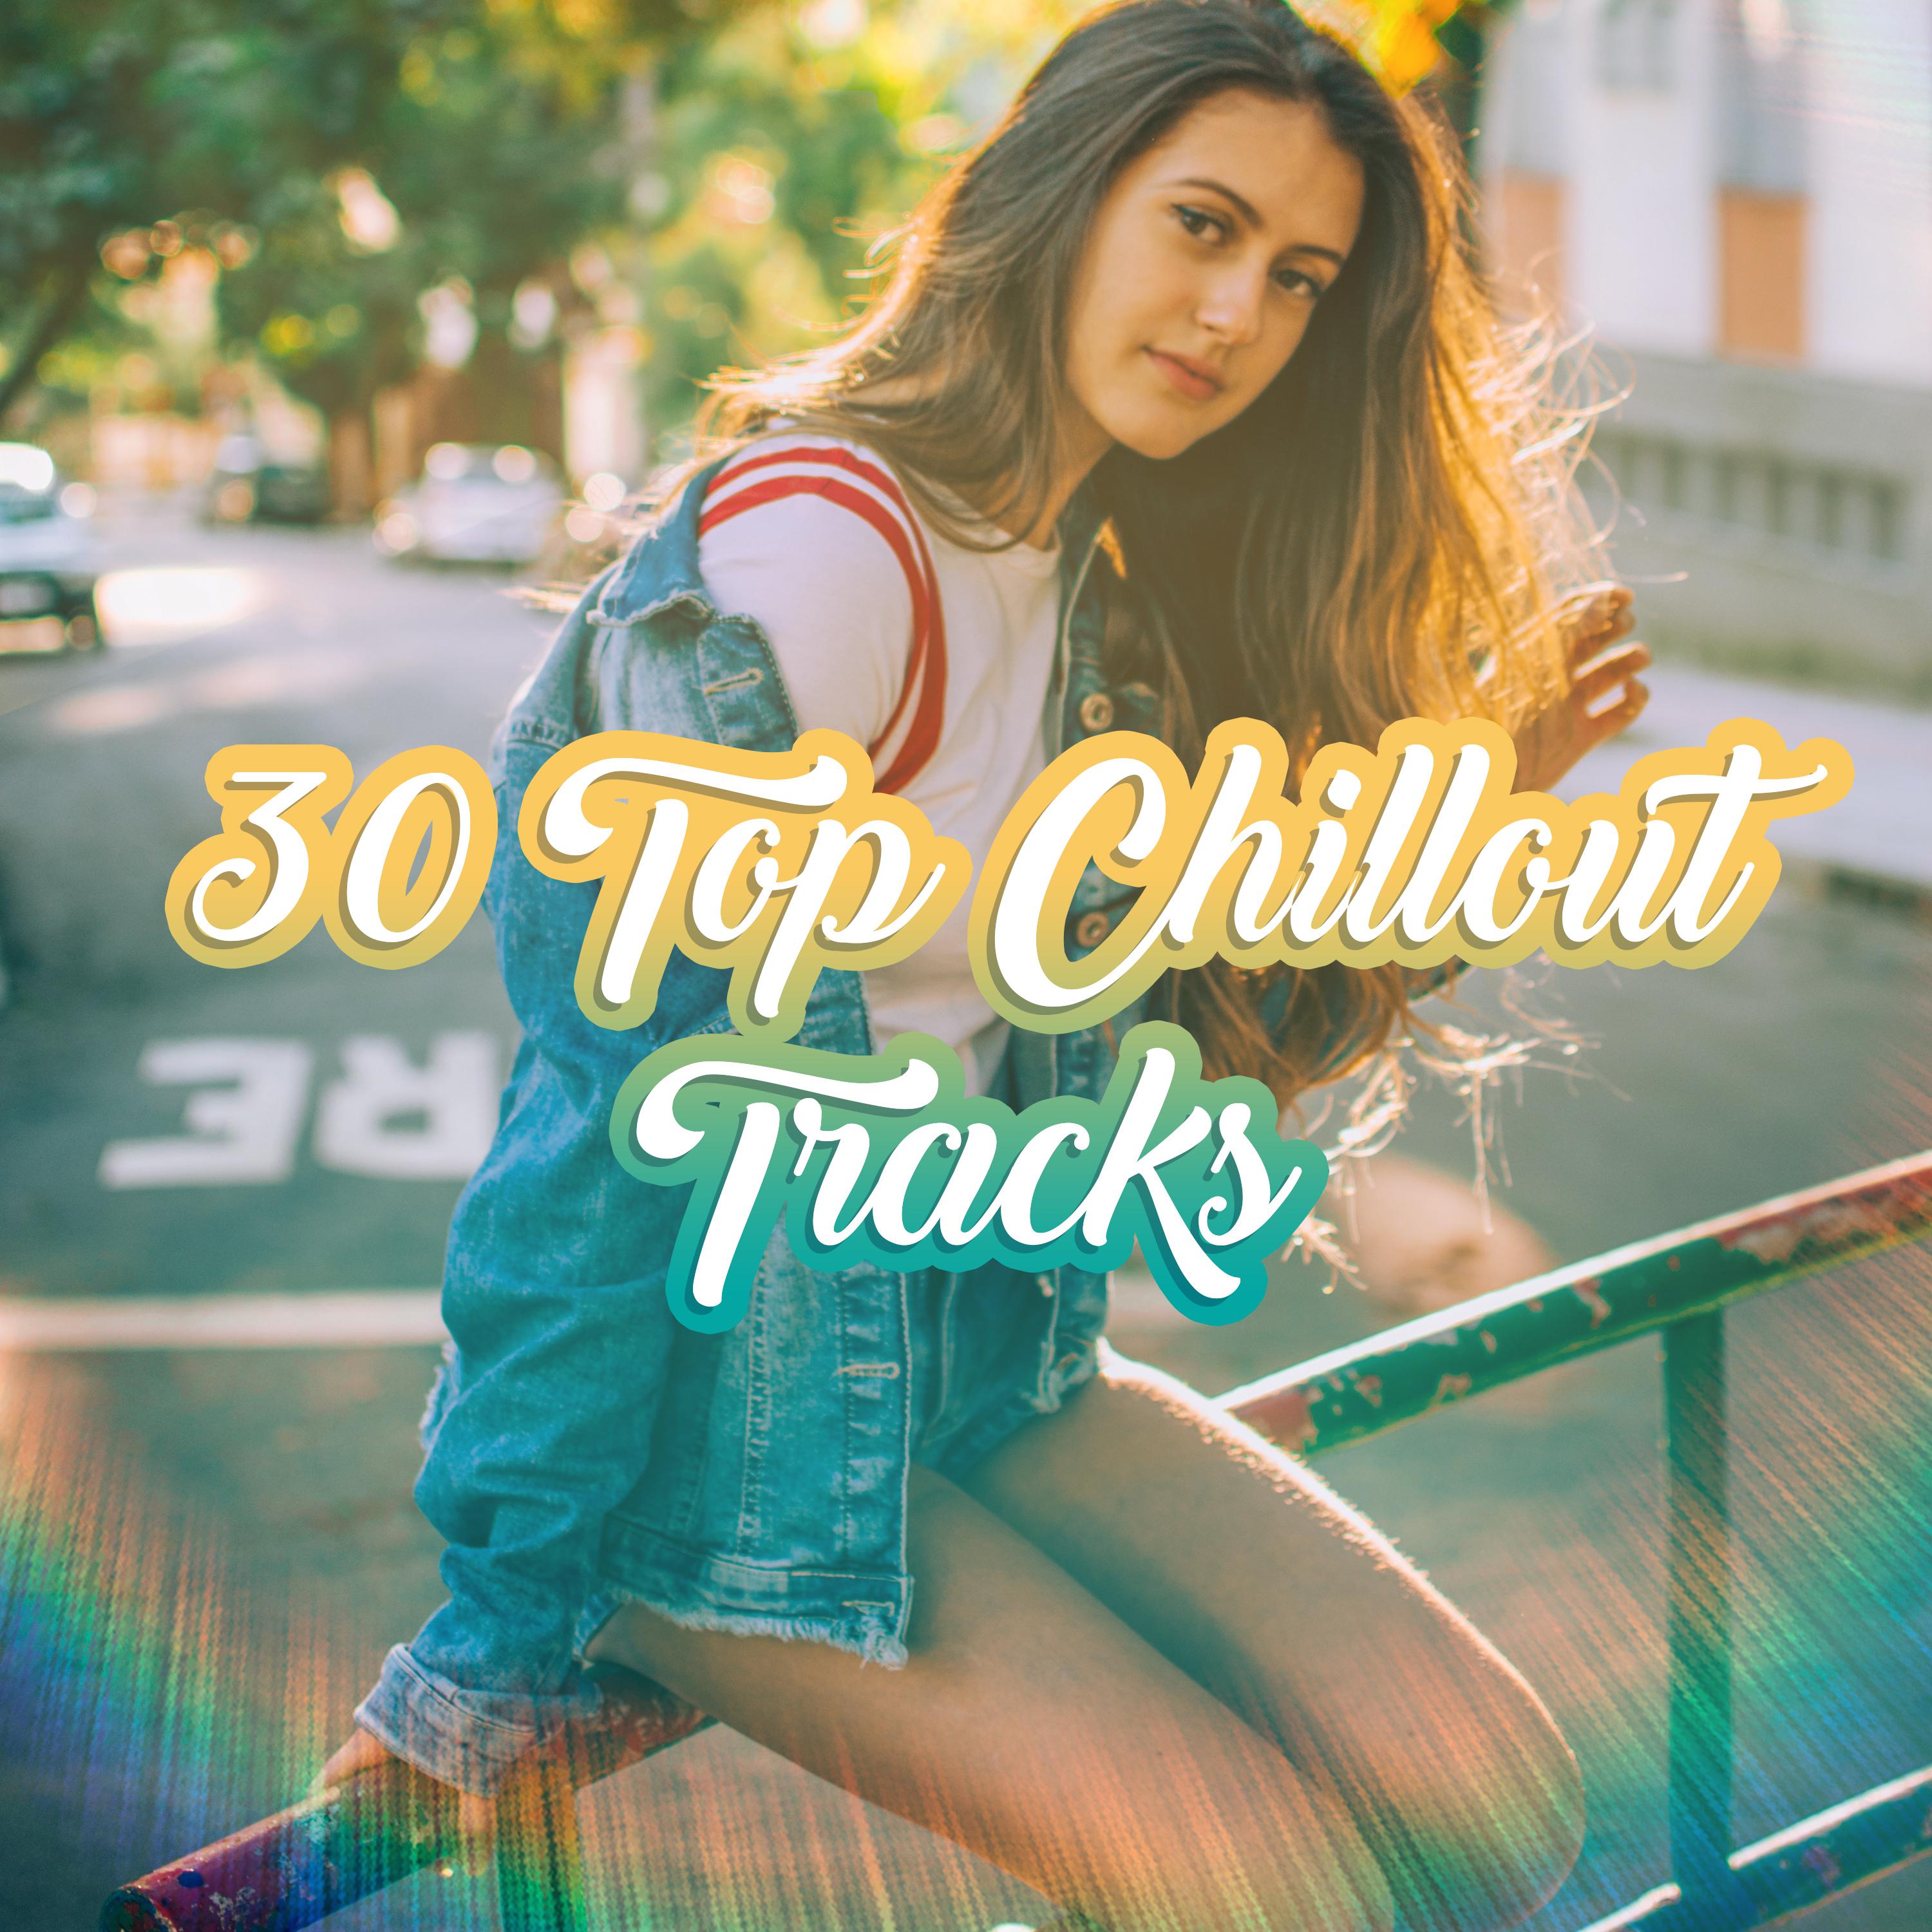 30 Top Chillout Tracks (Easy Listening, Music for Summer 2019, Beach Party Ibiza, Lounge Hotel)